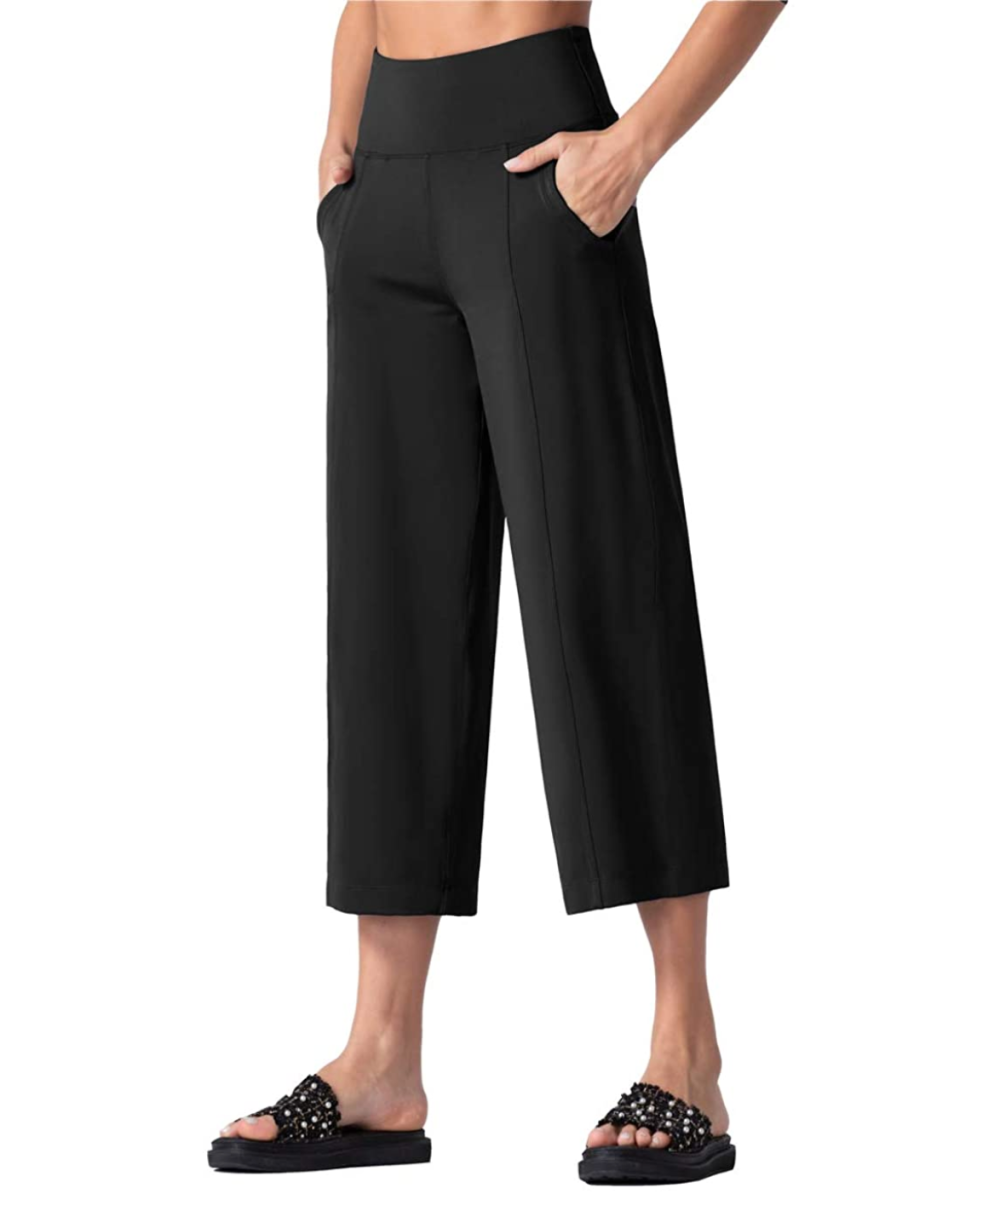 The Gym People High-Waisted Capris May Be the Comfiest Pants Ever | Us ...